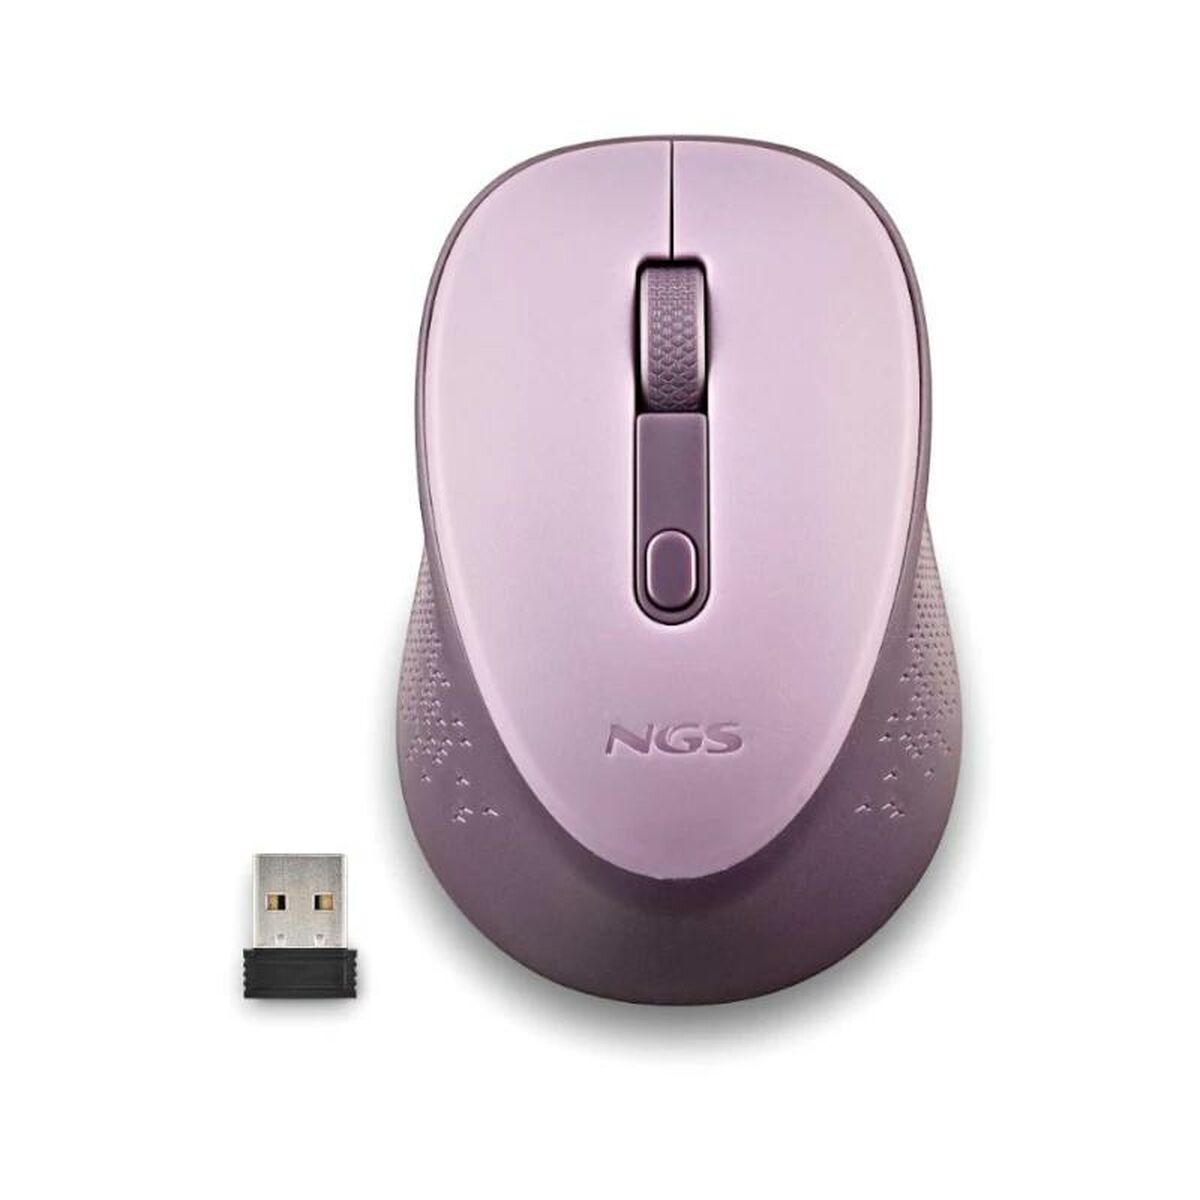 Mouse NGS Lilac, NGS, Computing, Accessories, mouse-ngs-lilac, Brand_NGS, category-reference-2609, category-reference-2642, category-reference-2656, category-reference-t-19685, category-reference-t-19908, category-reference-t-21353, category-reference-t-25626, computers / peripherals, Condition_NEW, office, Price_20 - 50, Teleworking, RiotNook